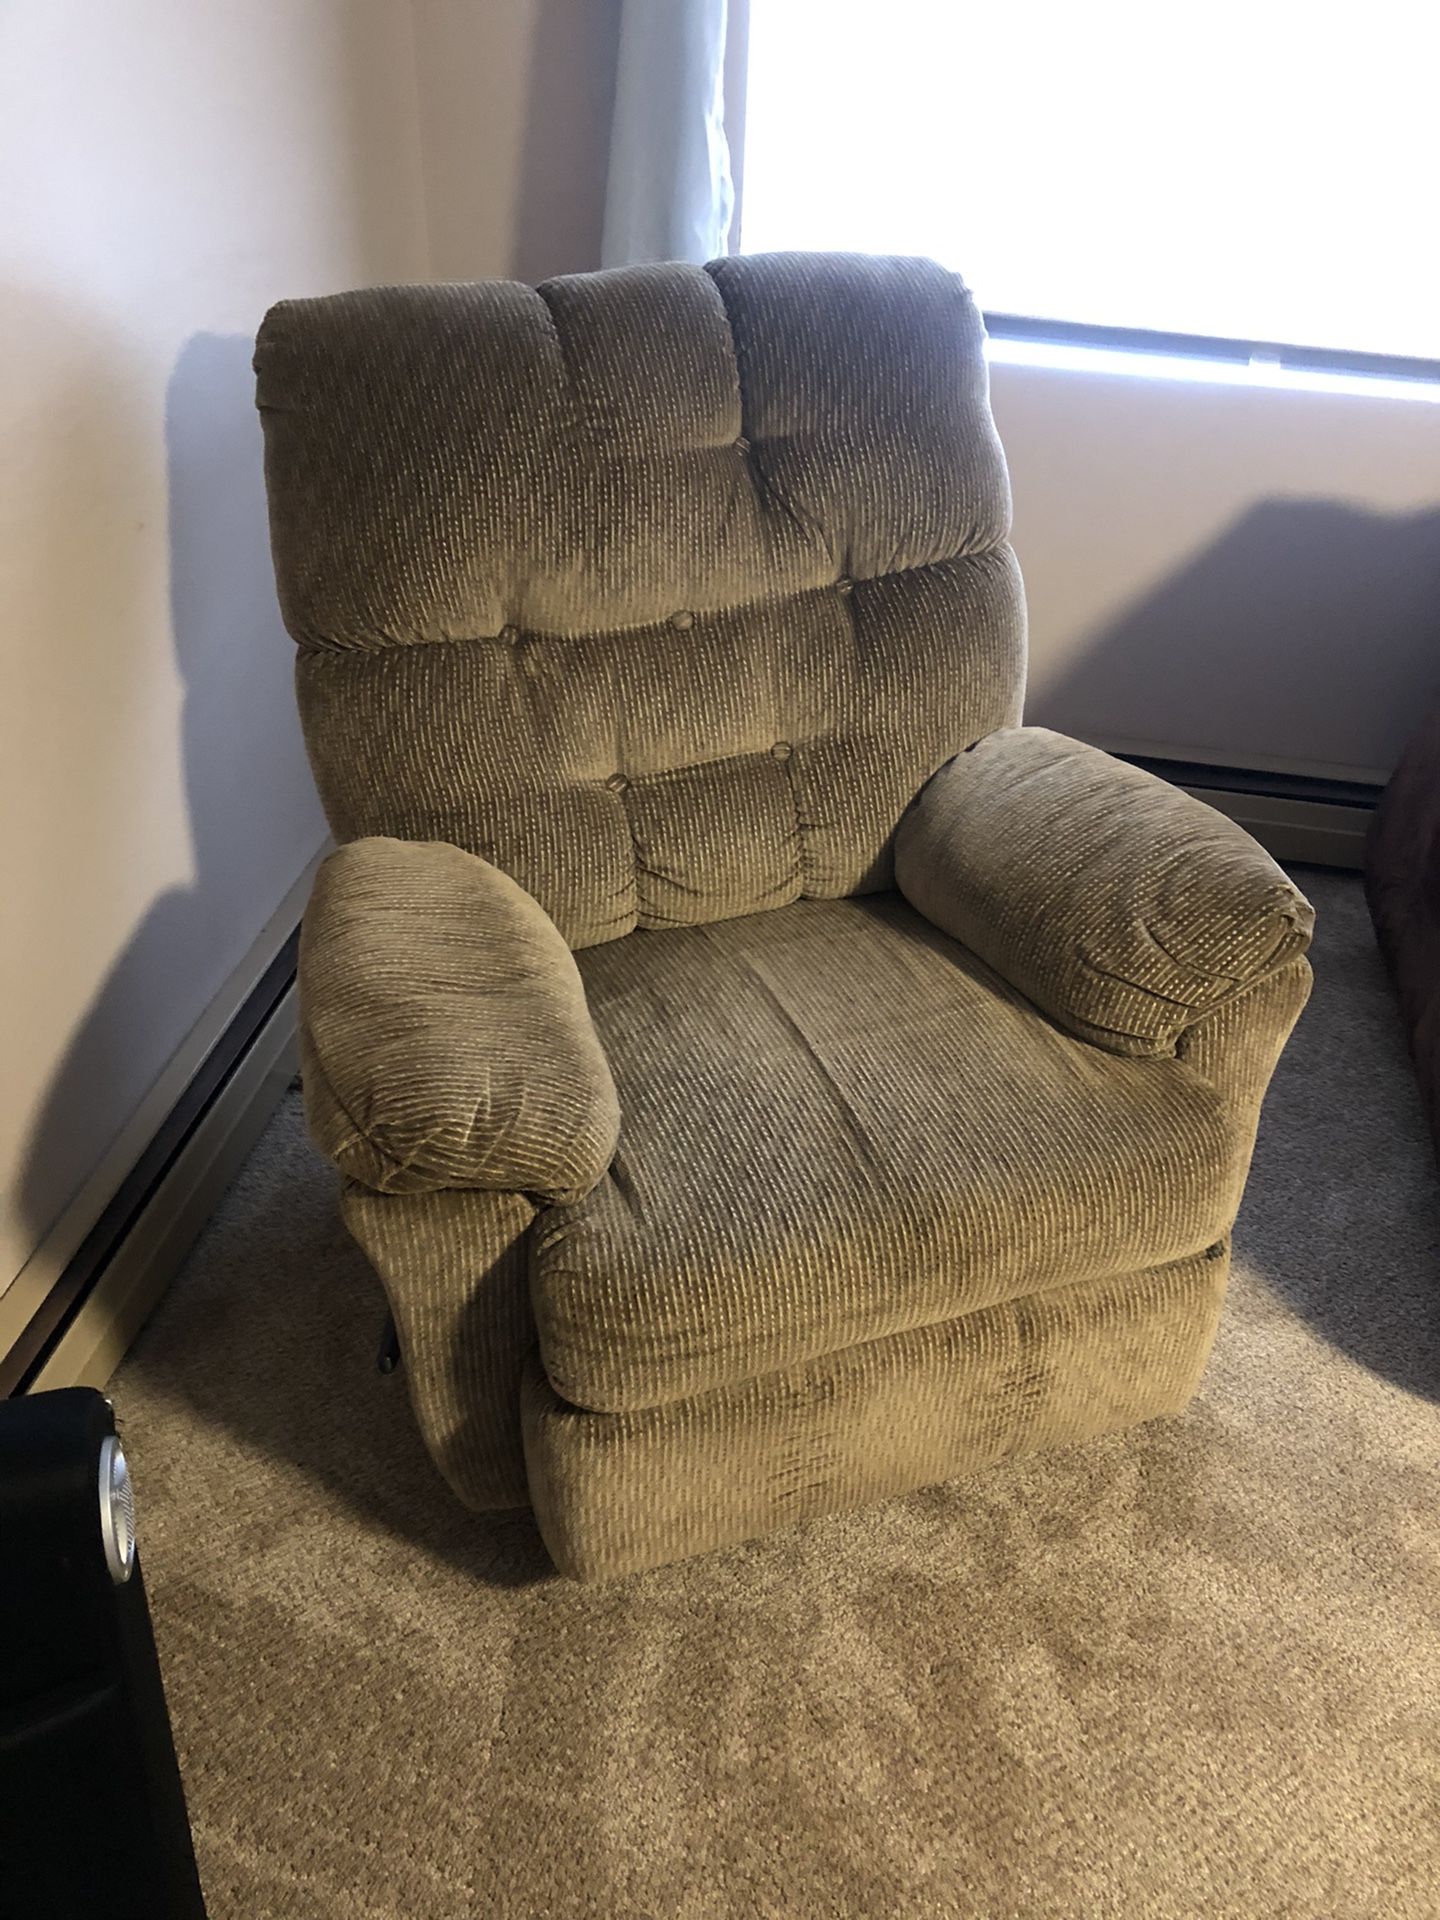 Recliner for sale!